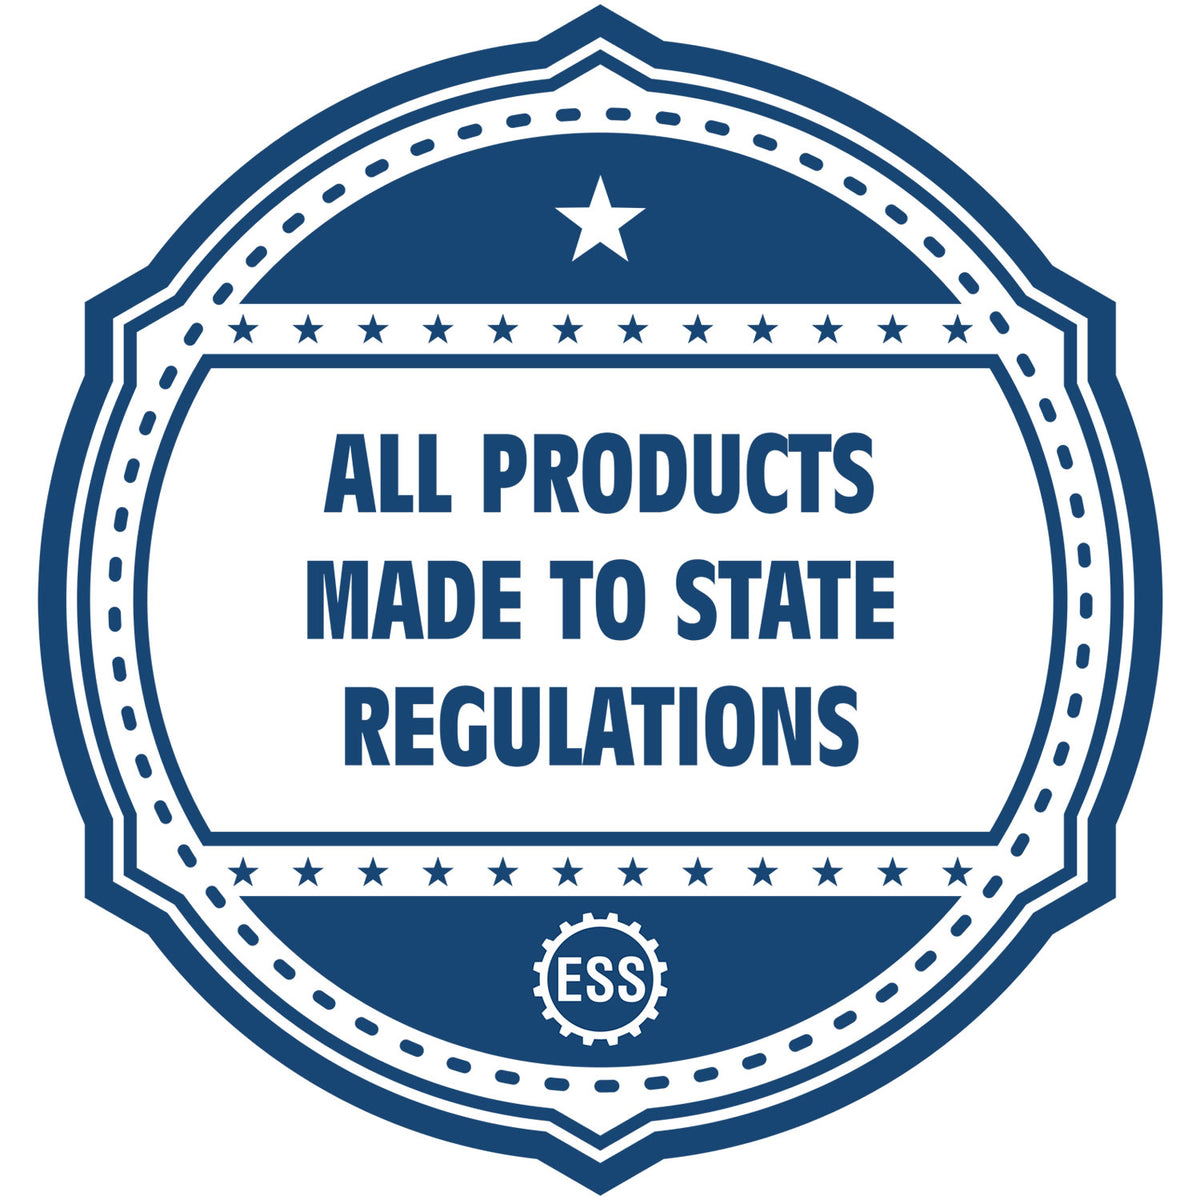 An icon or badge element for the Slim Pre-Inked Nebraska Landscape Architect Seal Stamp showing that this product is made in compliance with state regulations.